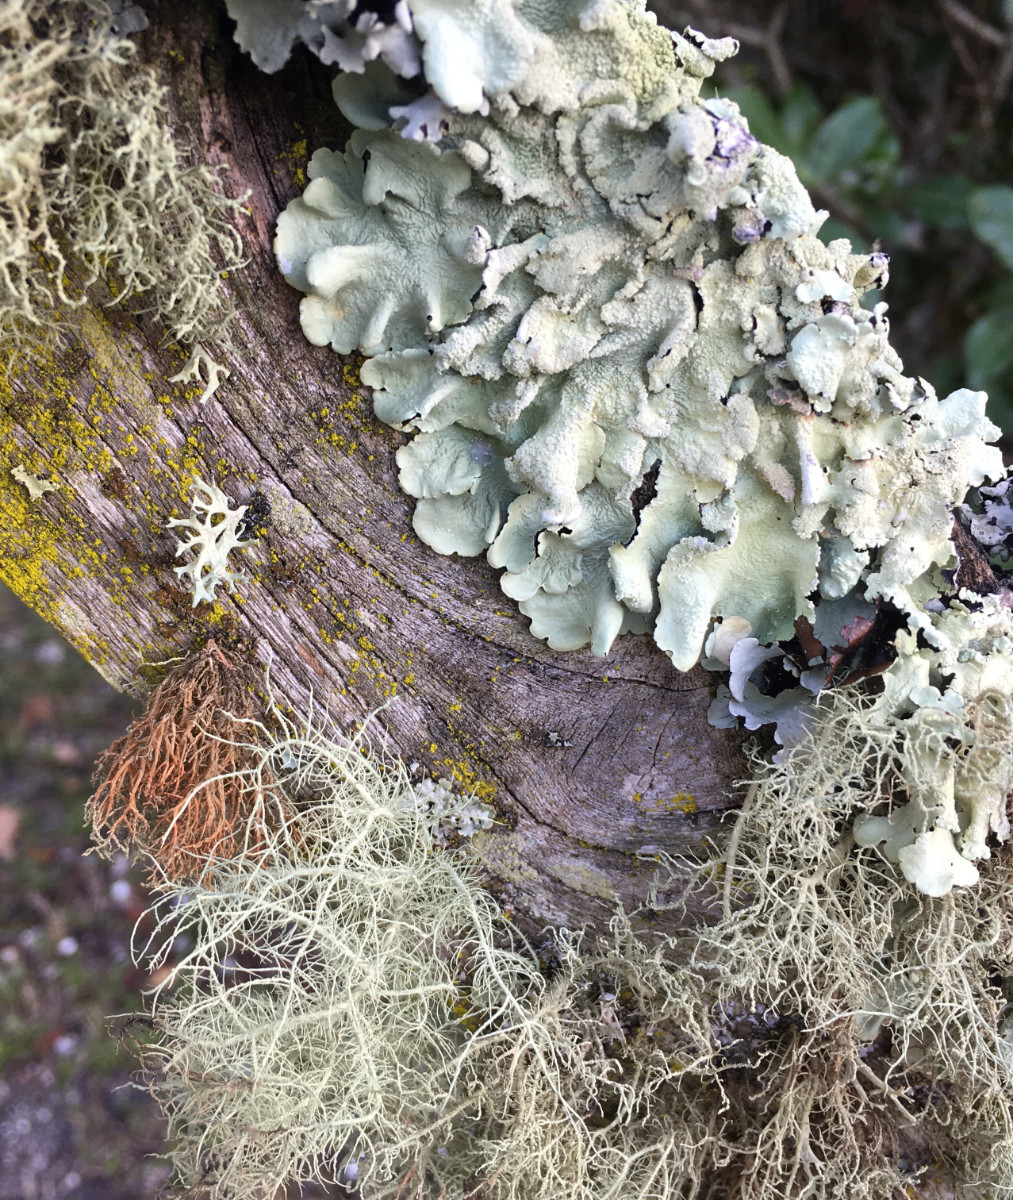 Several different types, colours, and textures of lichen and moss live happily together on an oak